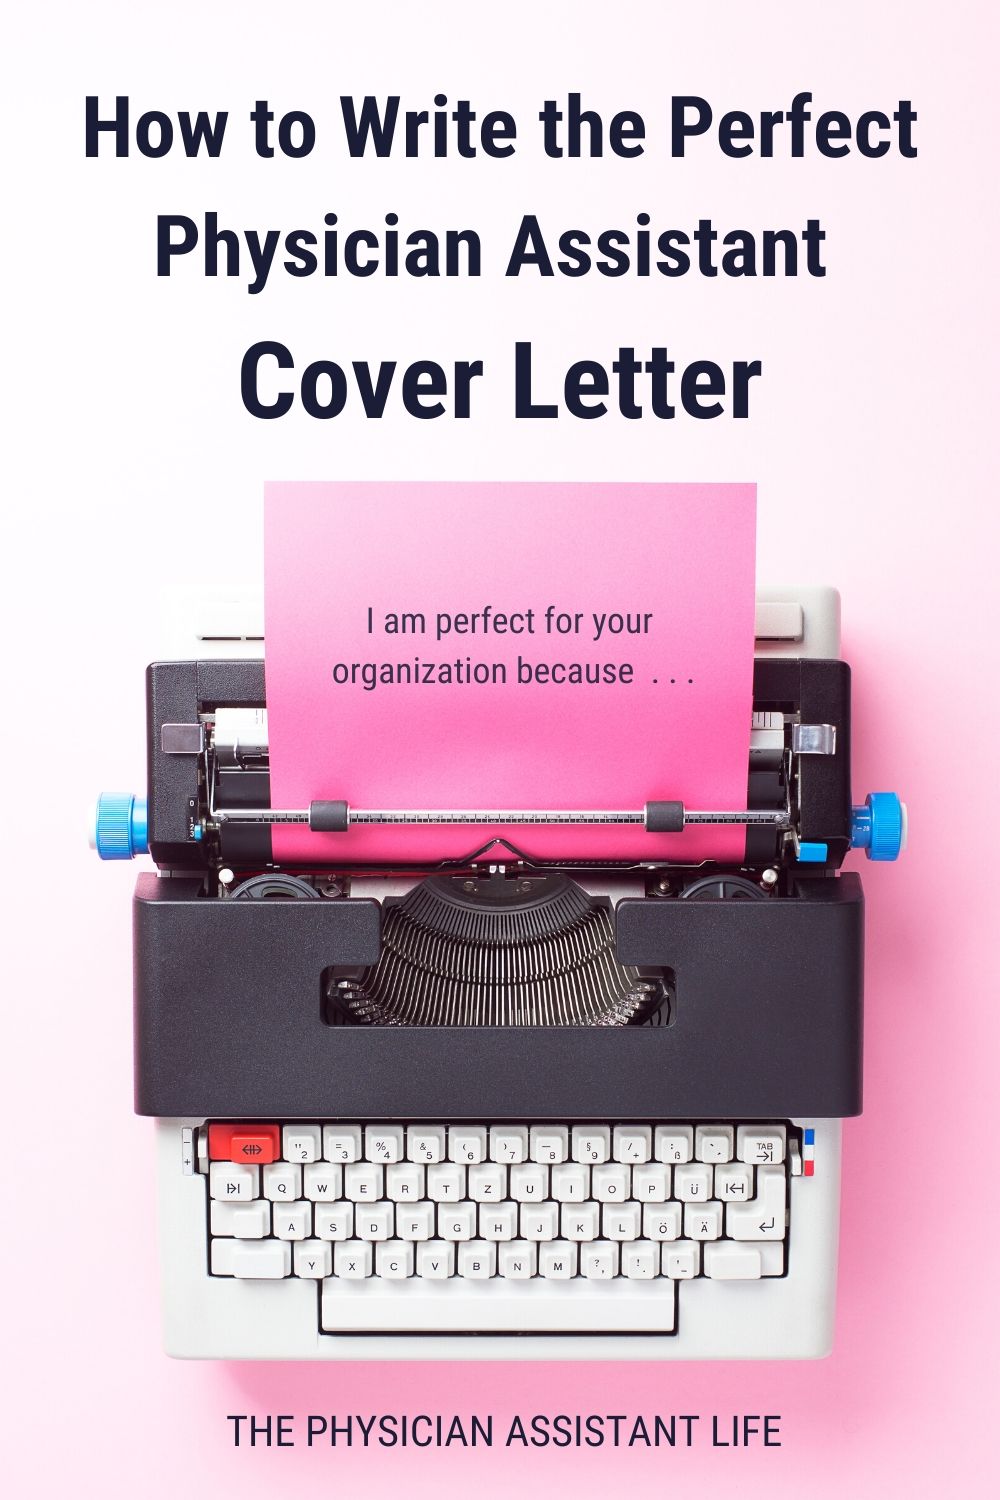 How To Write The Perfect Physician Assistant Cover Letter The Physician Assistant Life